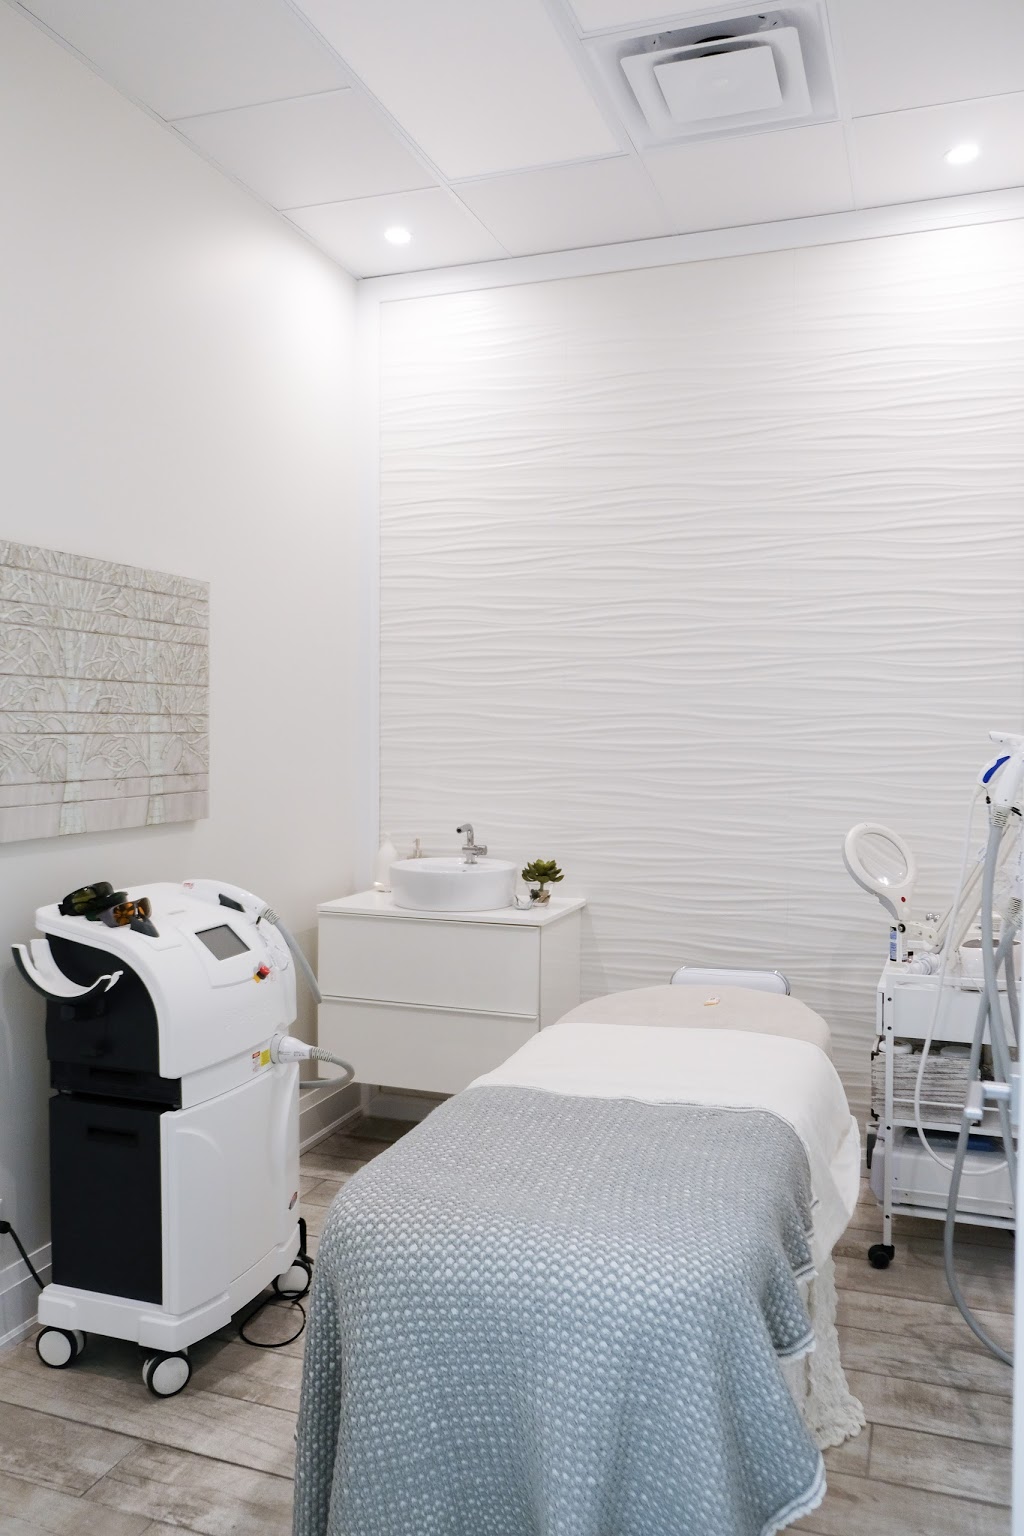 Skinprovement - Medi Spa & Laser Clinic | hair care | 3590 Rutherford Rd #6, Vaughan, ON L4H 3T8, Canada | 6476685494 OR +1 647-668-5494